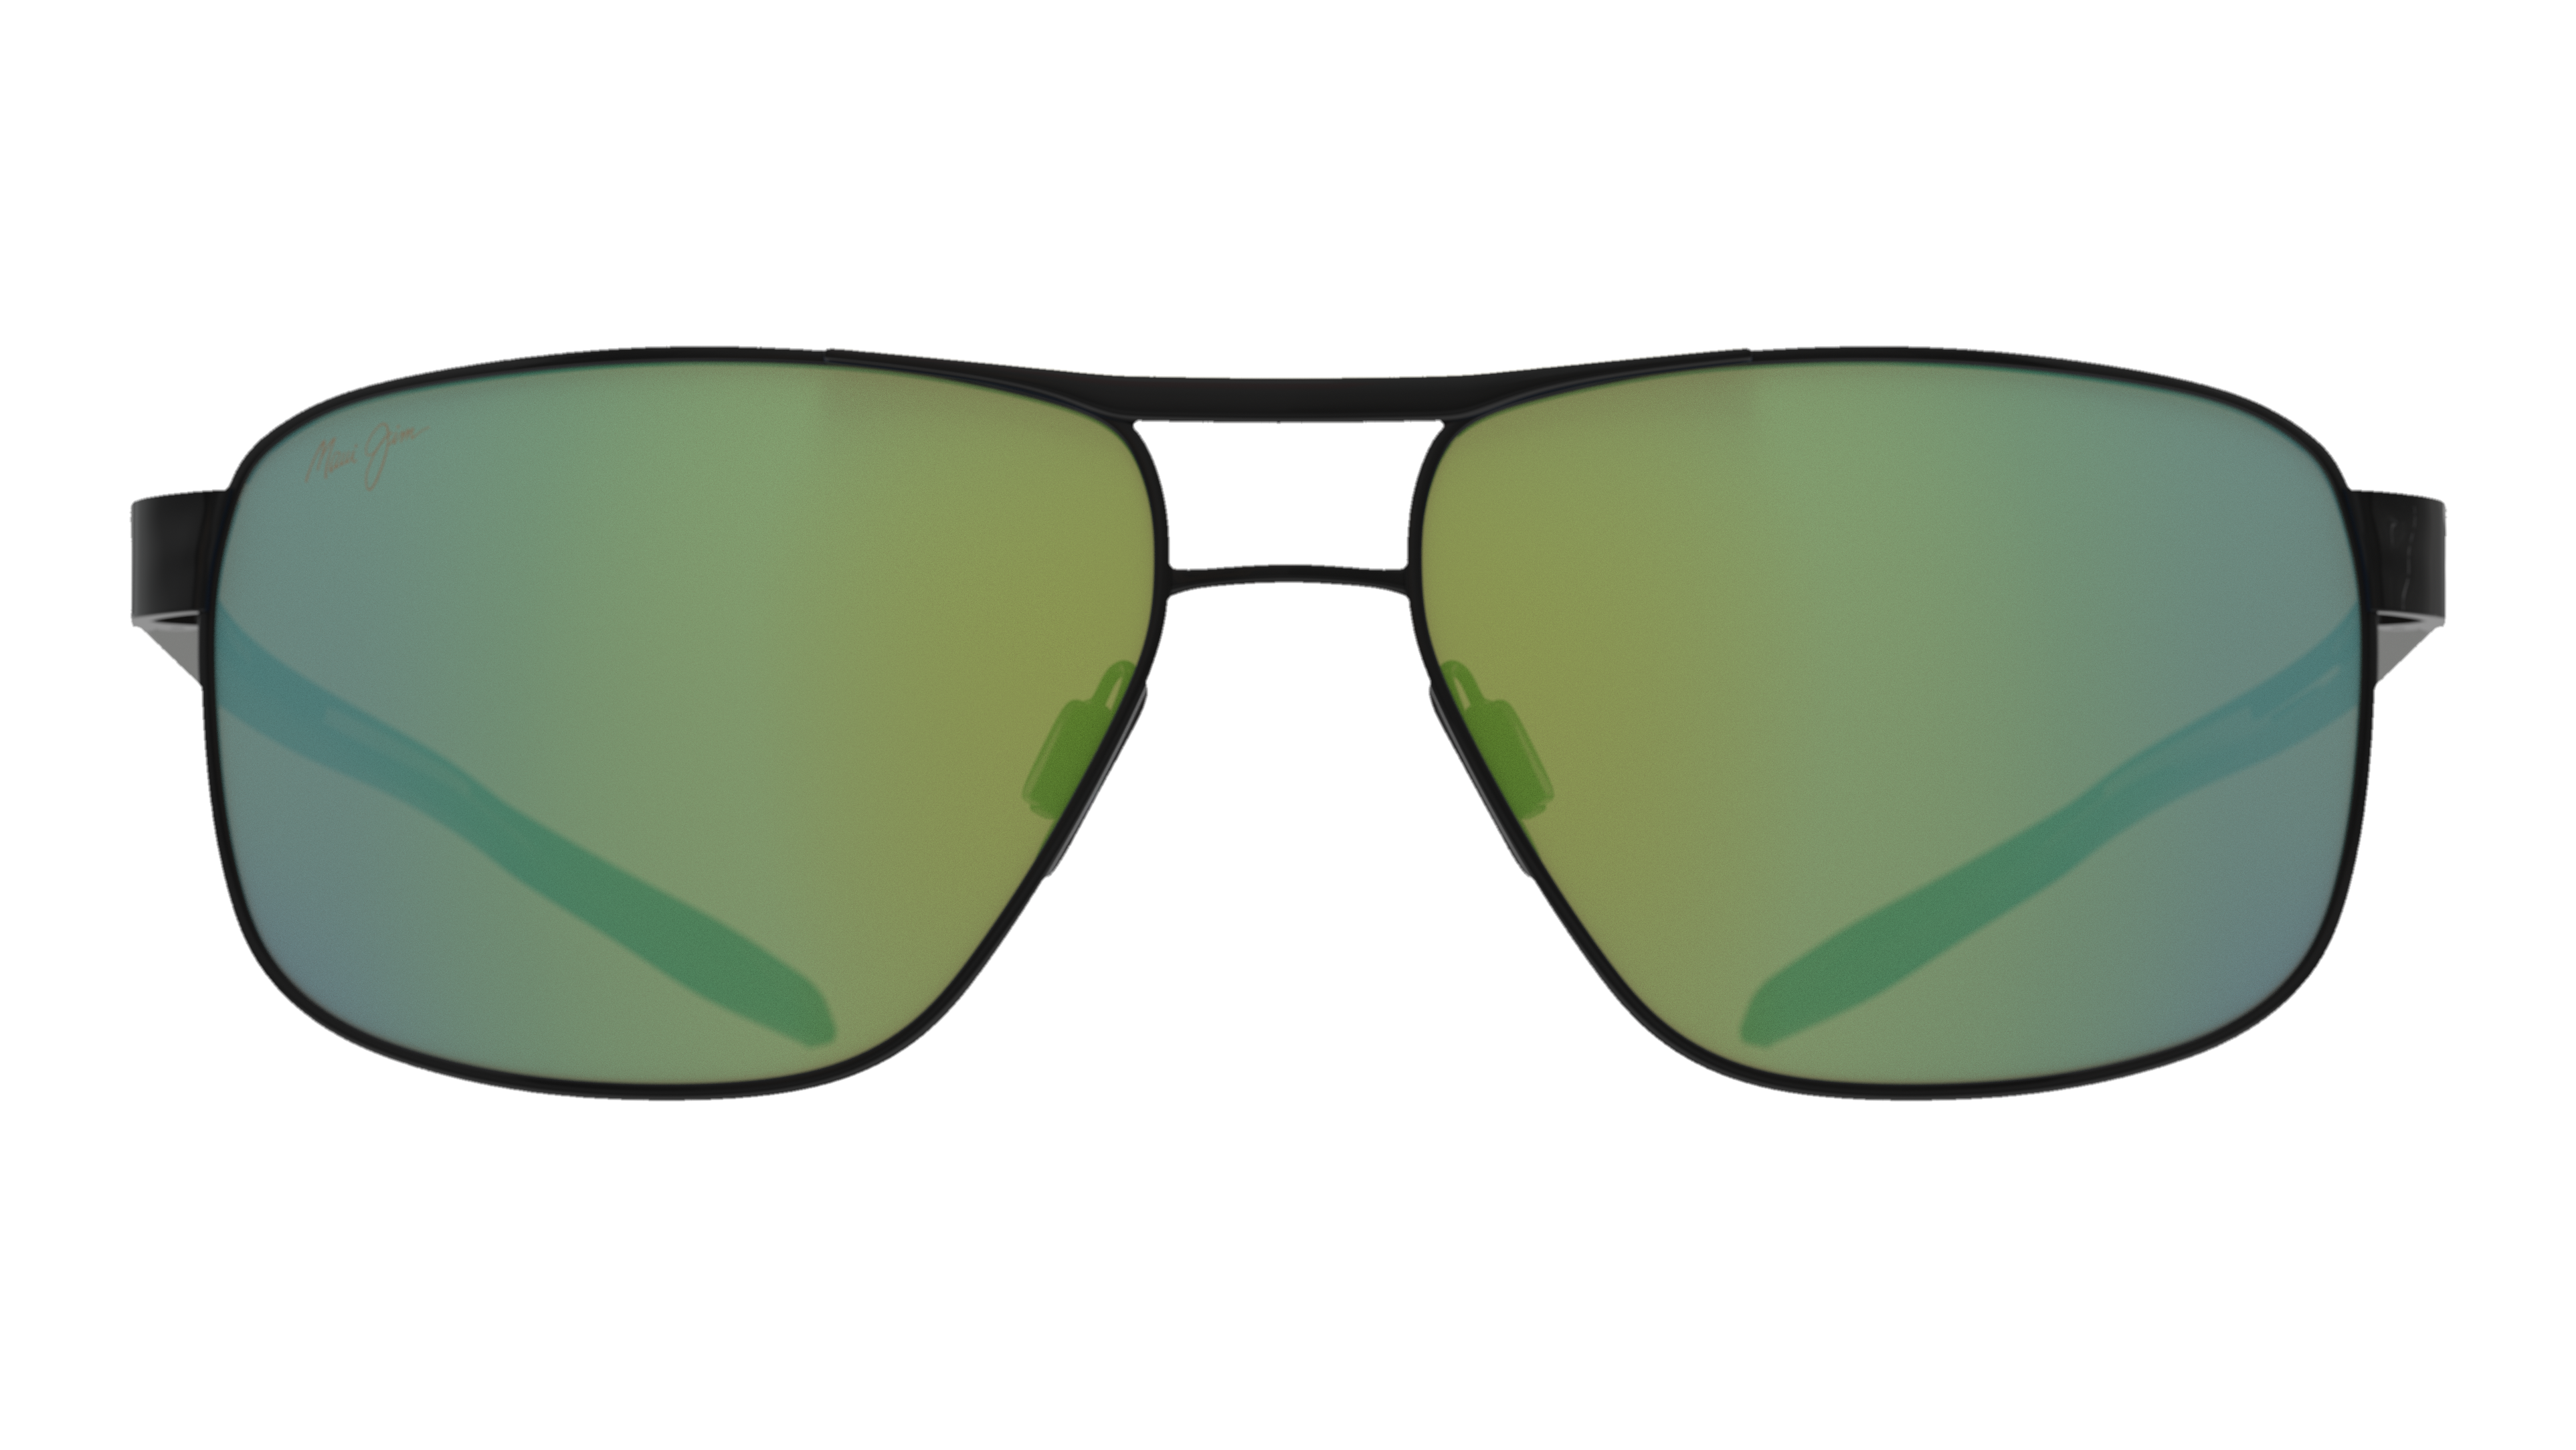 [products.image.front] MAUI JIM 835 The Bird 15B